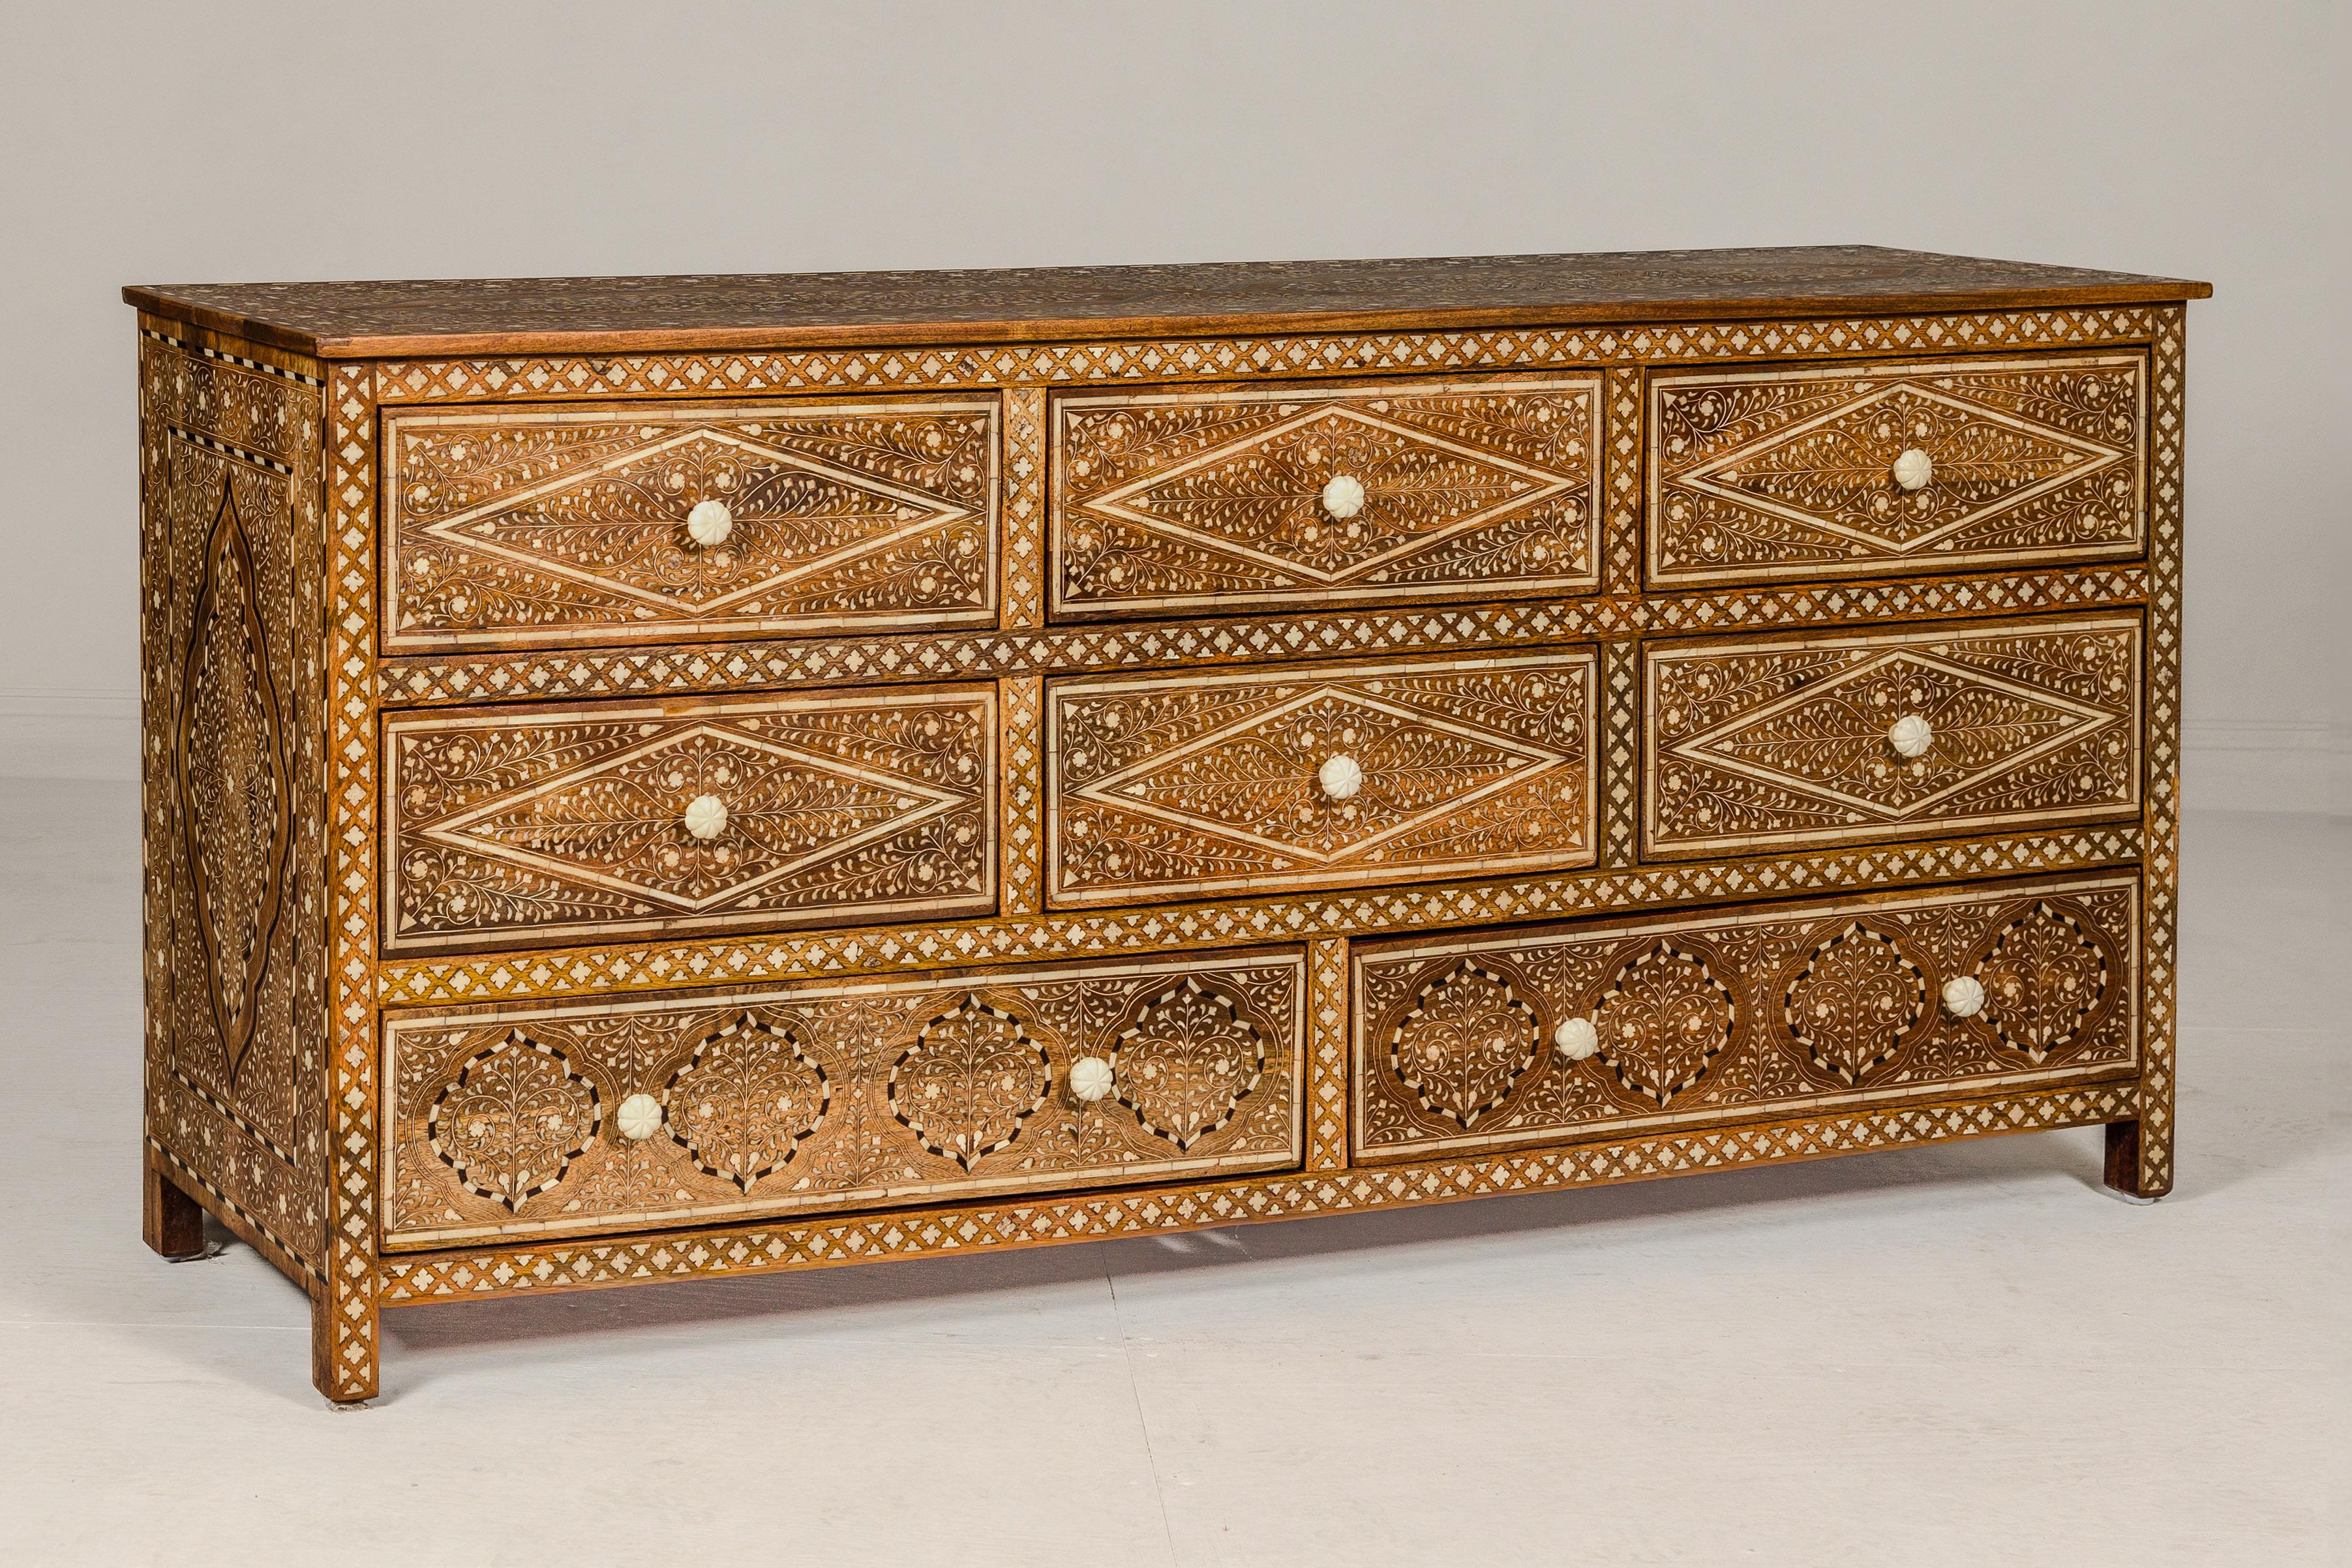 Anglo-Indian Style Mango Wood Dresser with Eight Drawers and Floral Bone Inlay 5